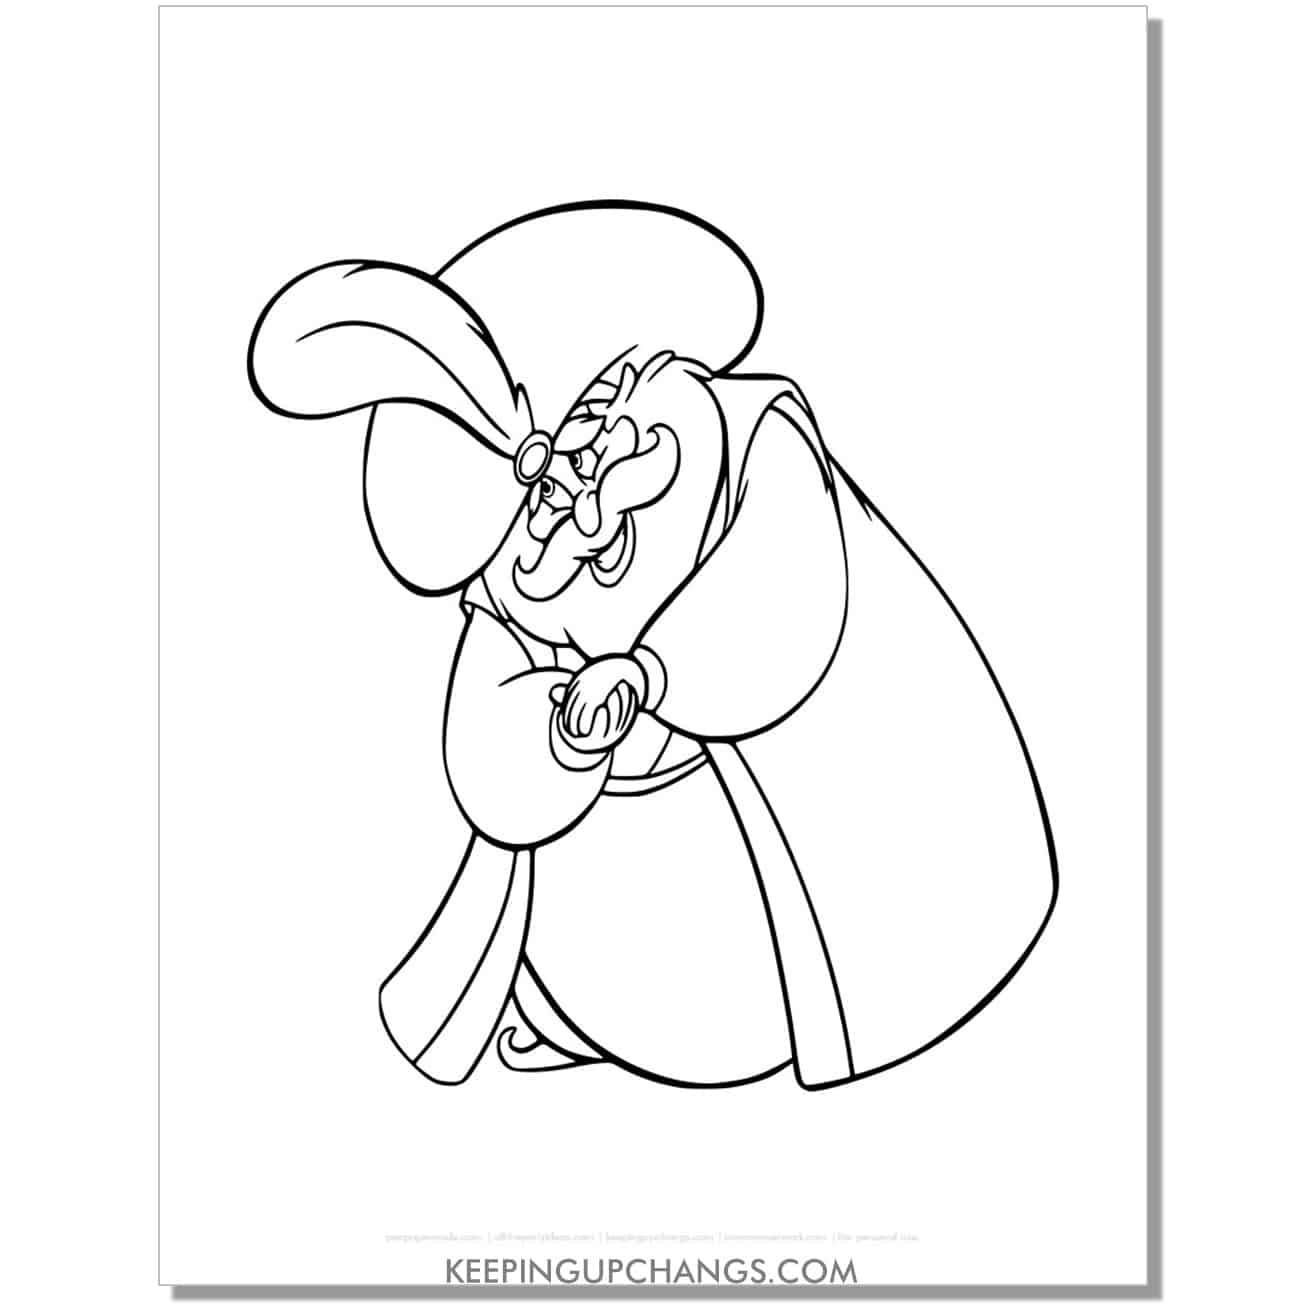 aladdin sultan taking a bow coloring page, sheet.